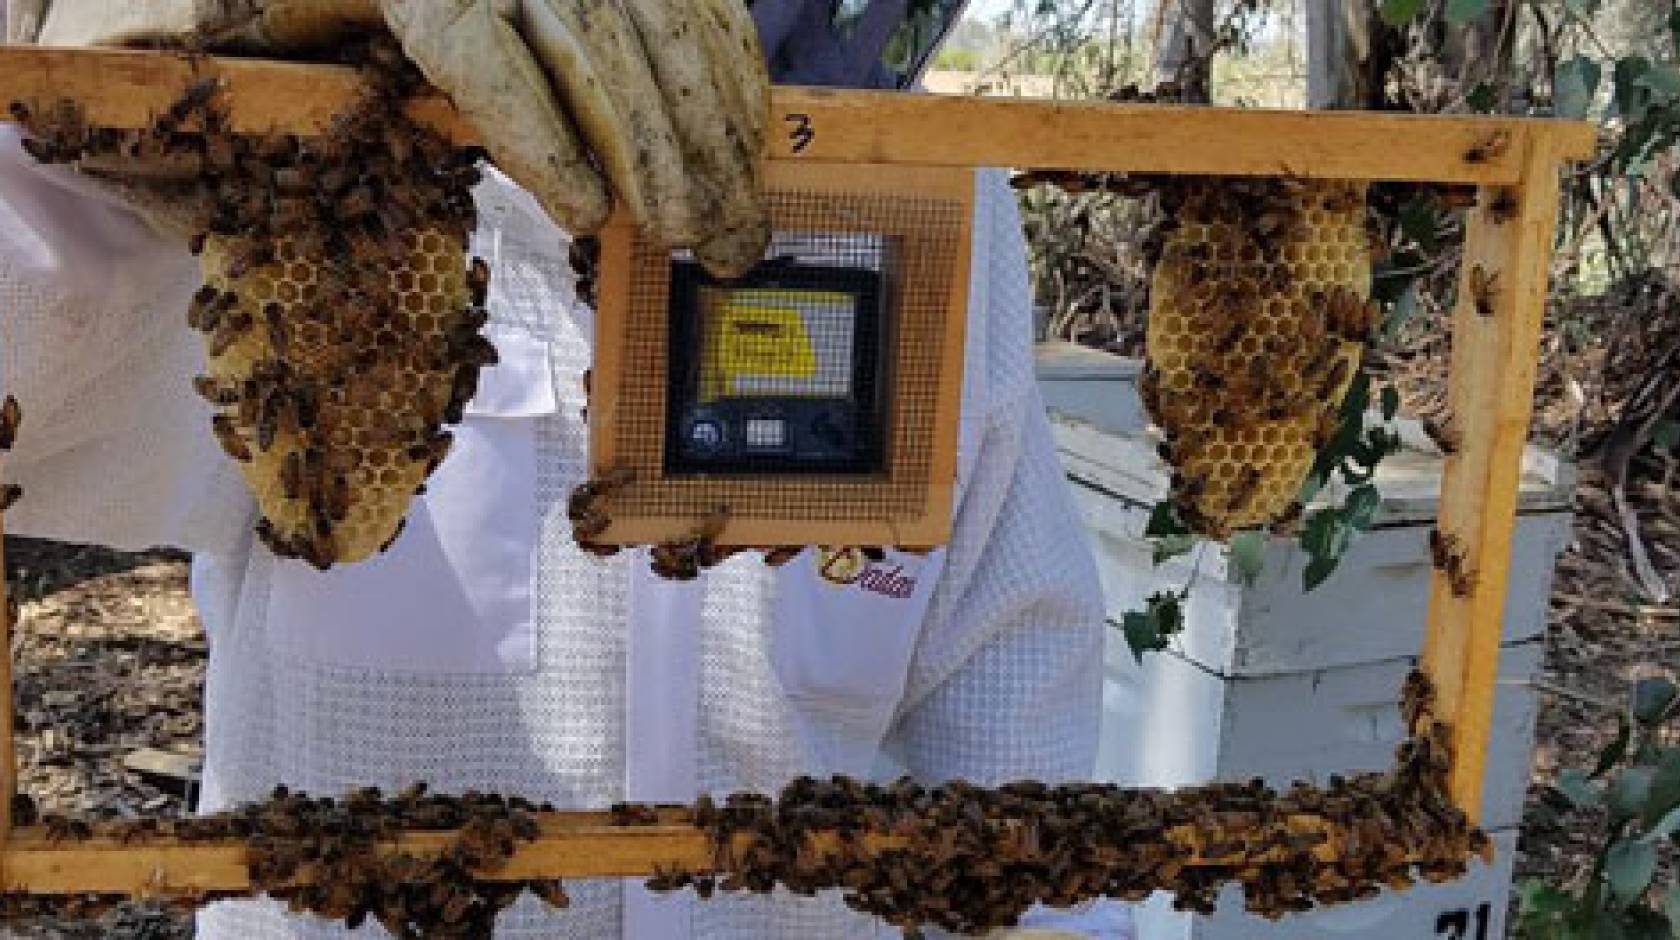 Beekeeper holding up rack filled with honeycomb and bees